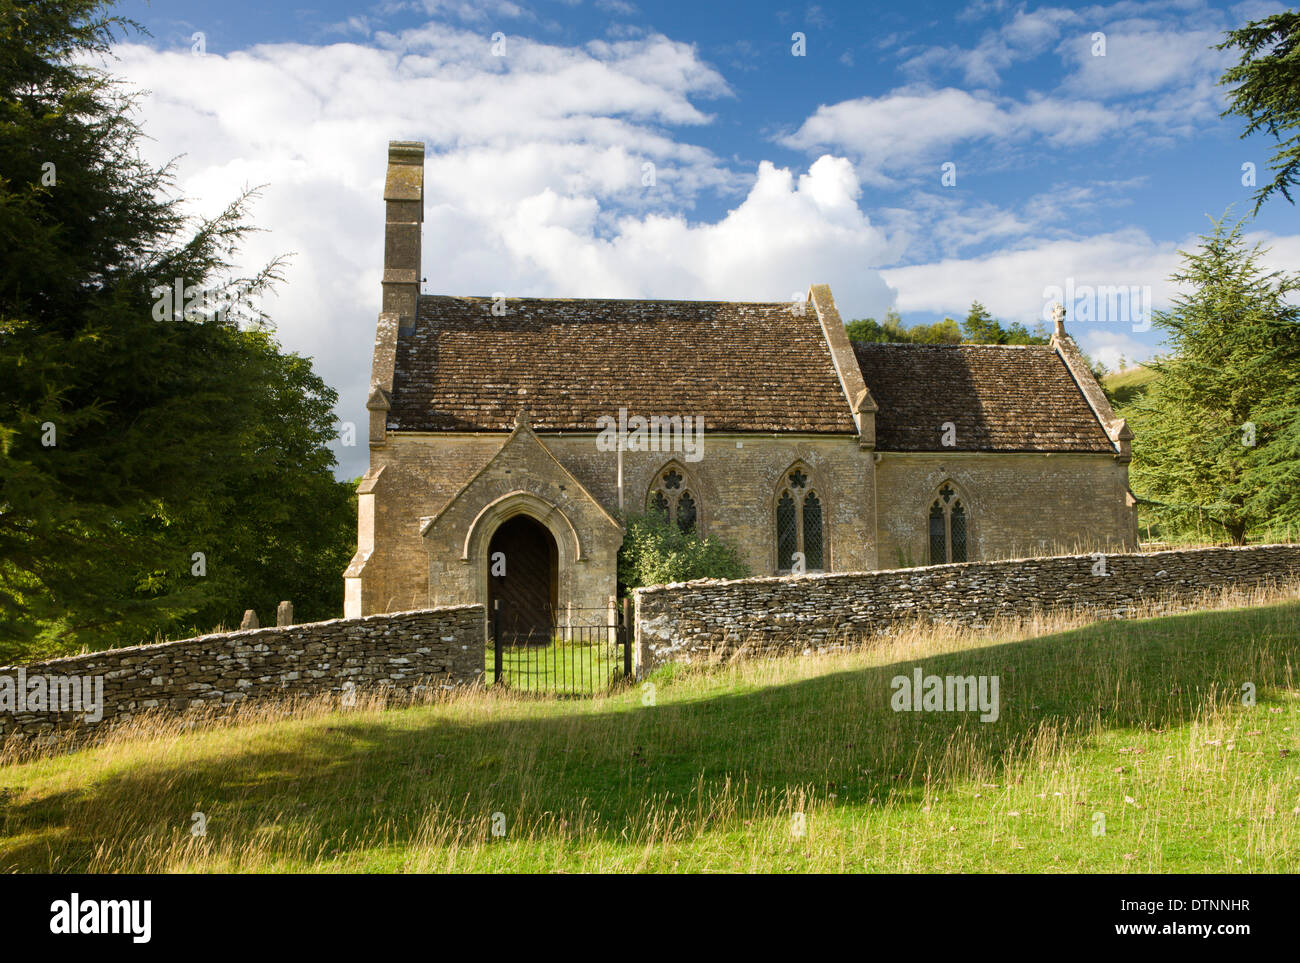 Church of St Mary the Virgin in Lasborough in the Cotswolds, Gloucestershire, England. Summer (August) 2010. Stock Photo